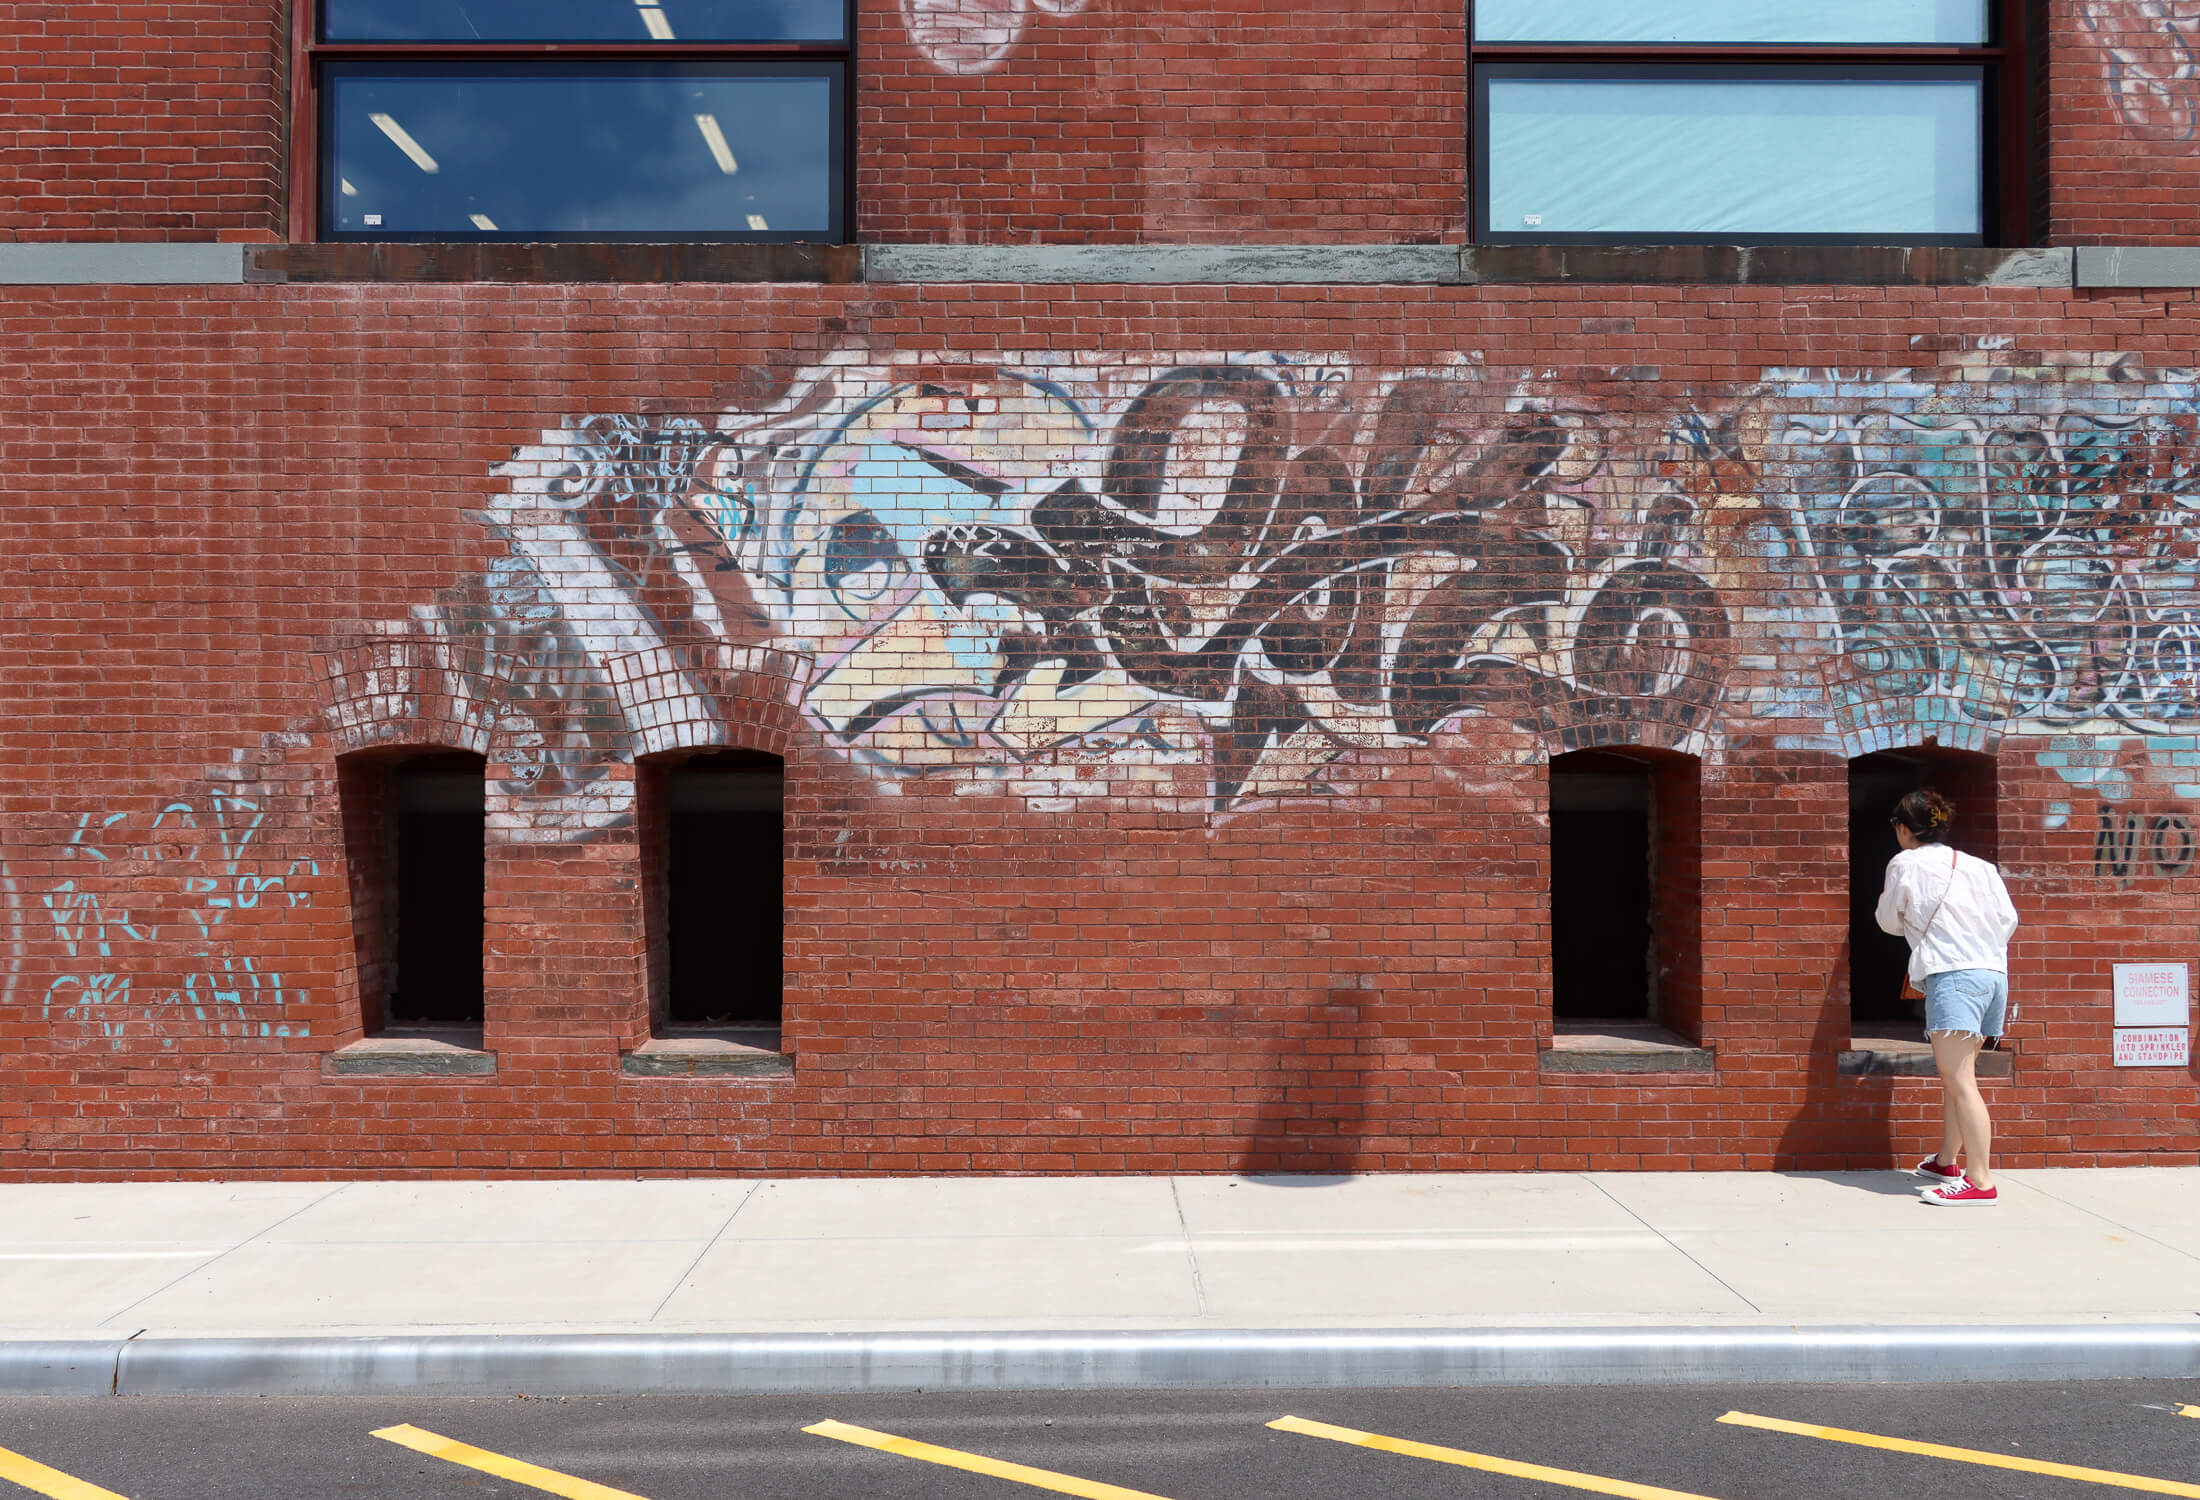 graffiti on the outside of the building